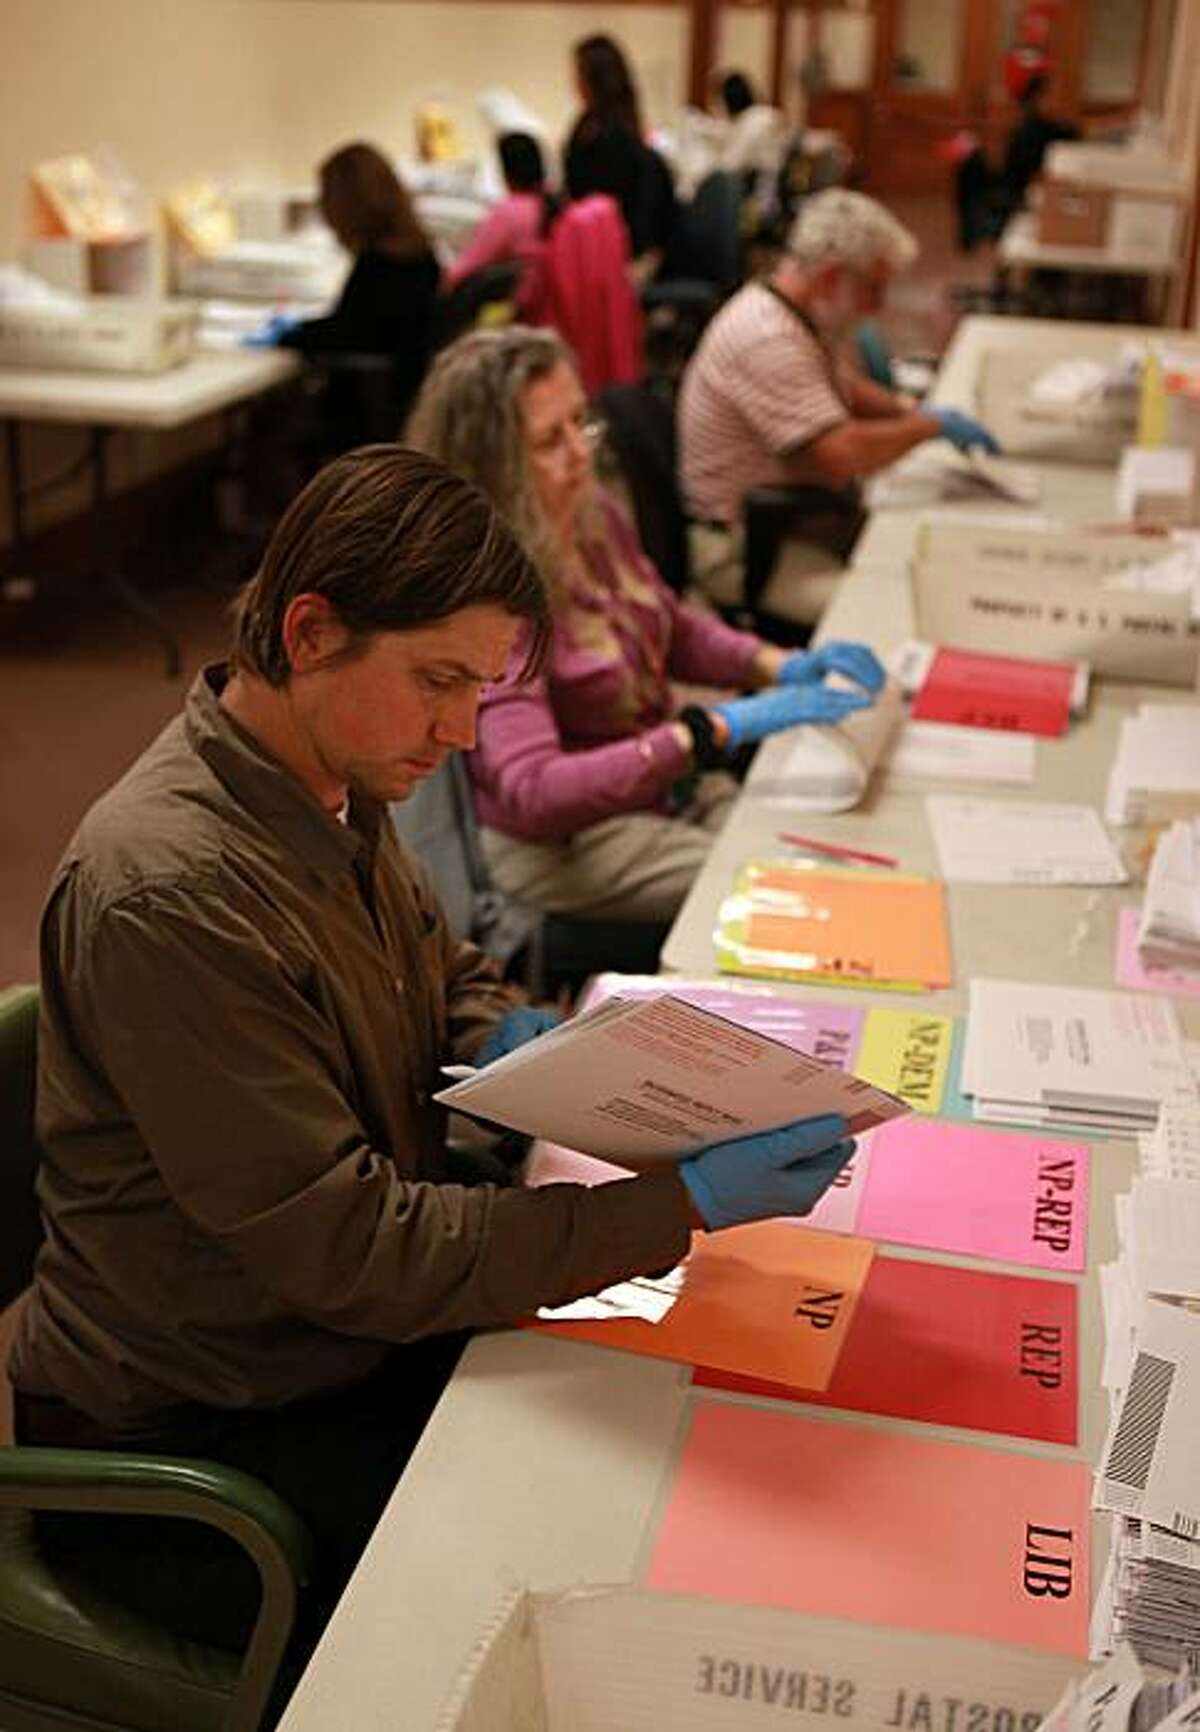 Vote by mail ballots being manually sorted by Daniel Libby at the department of elections ballot distribution staff today at City Hall in San Francisco, Calif., on Monday, June 7, 2010.